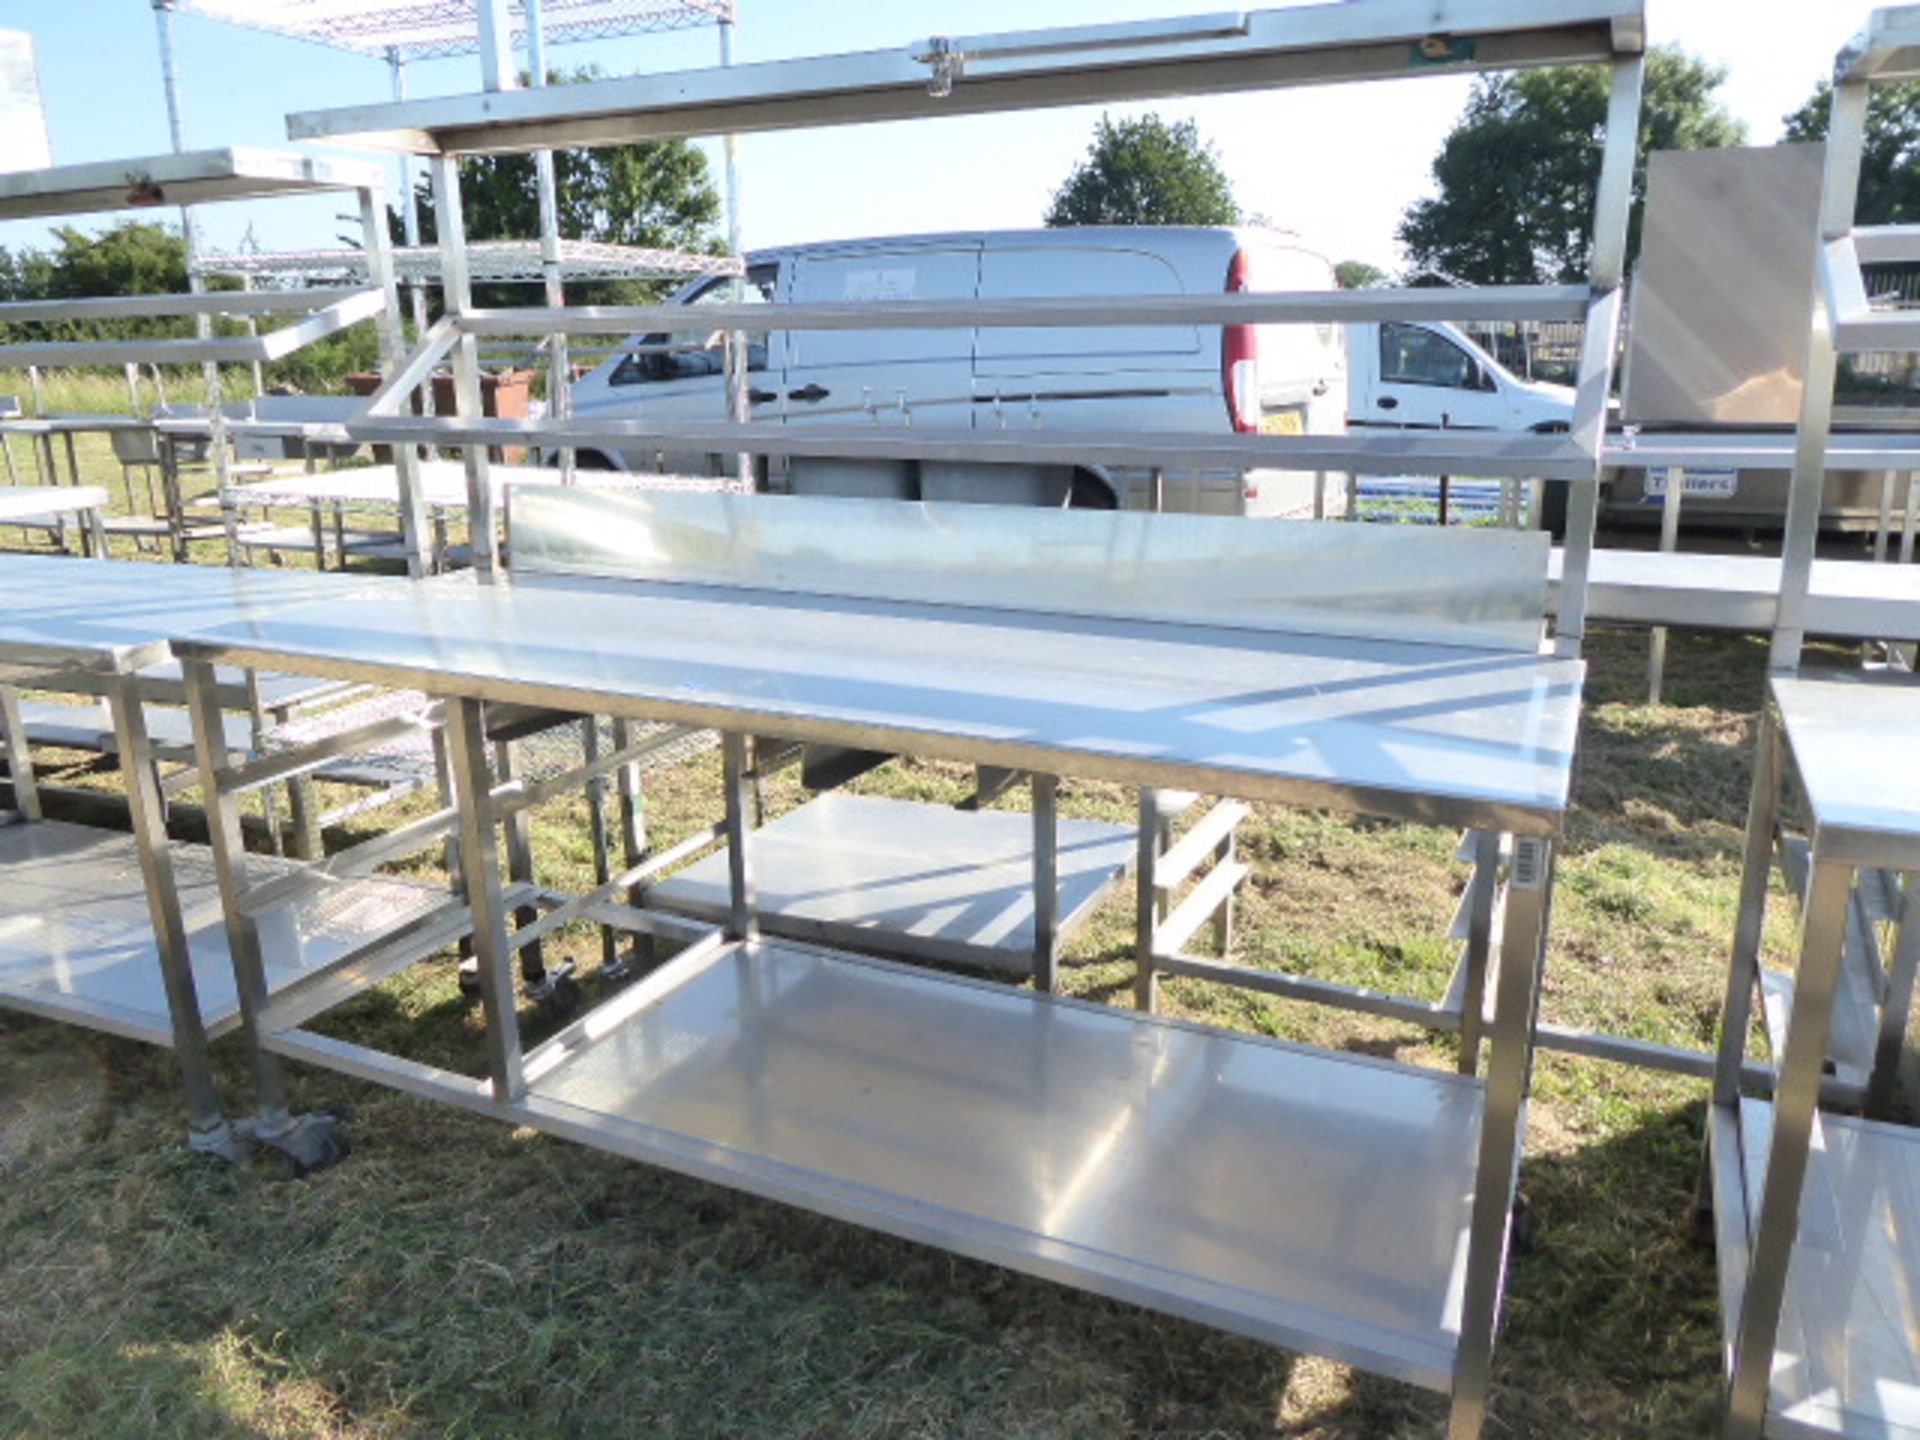 Stainless steel mobile food preparation station with 1 shelf over, shelf under space for trays and a